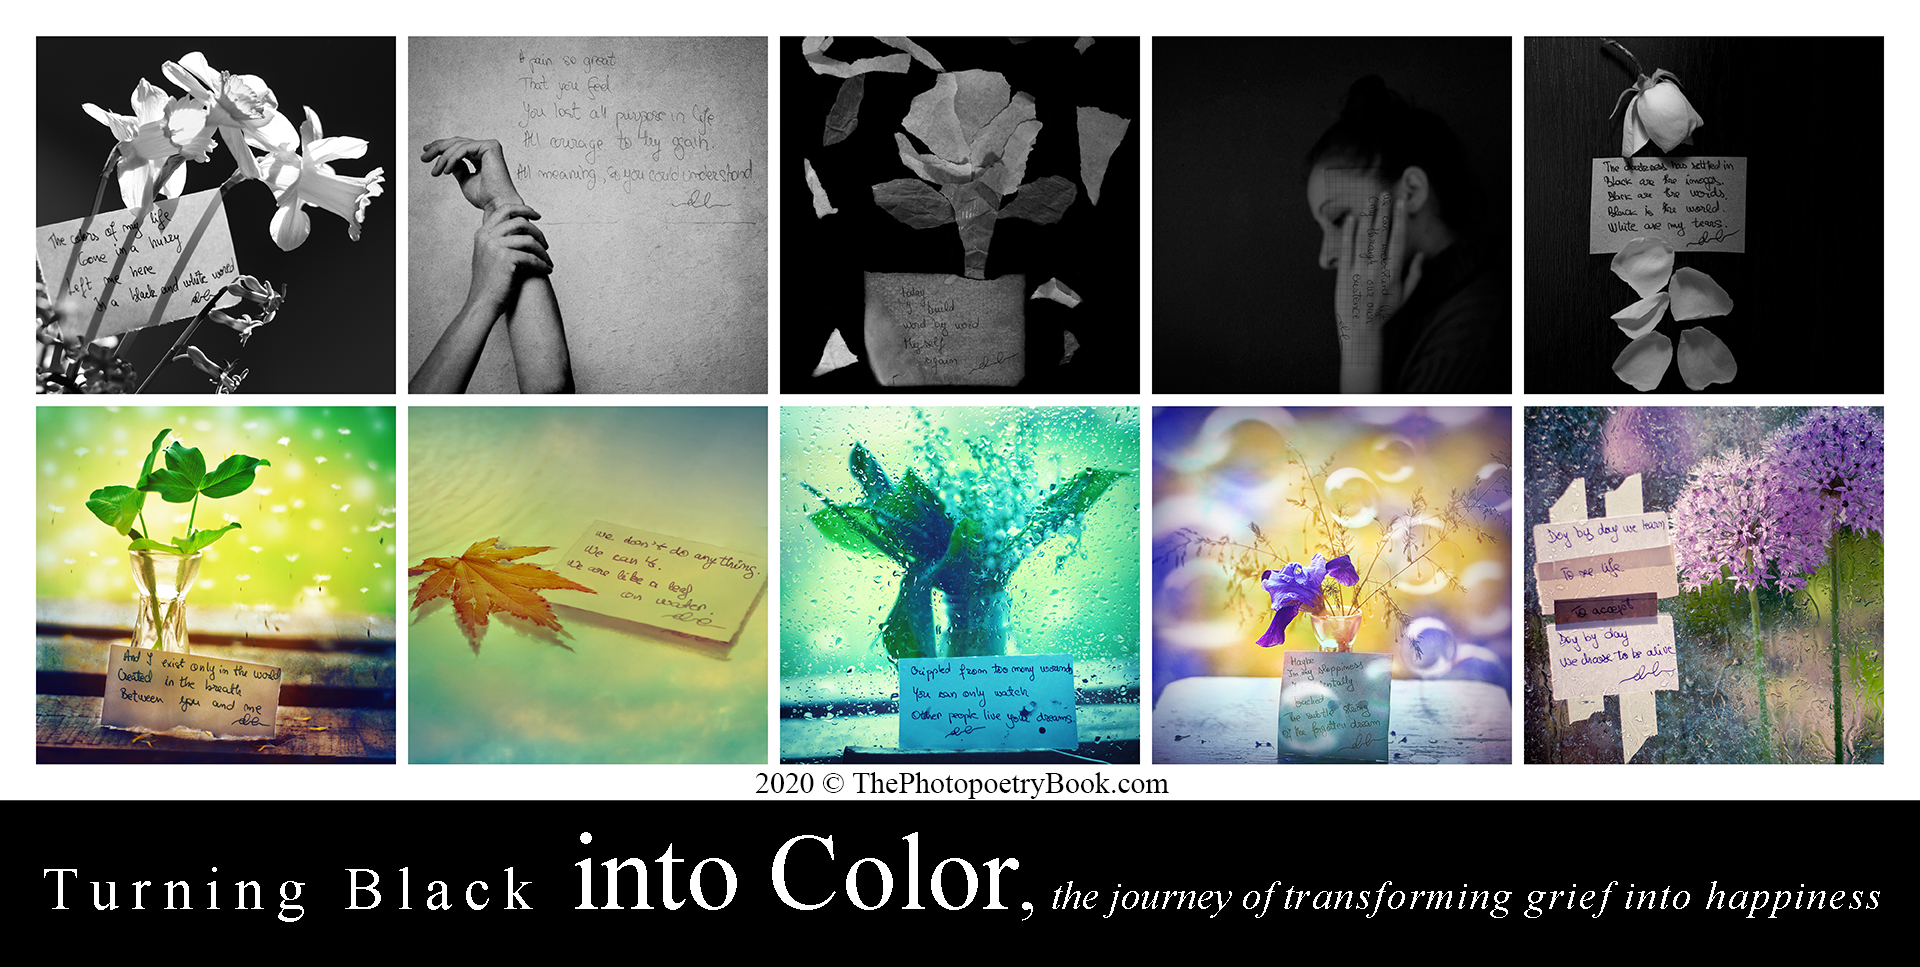 Turning Black into Color - turning grief into happiness